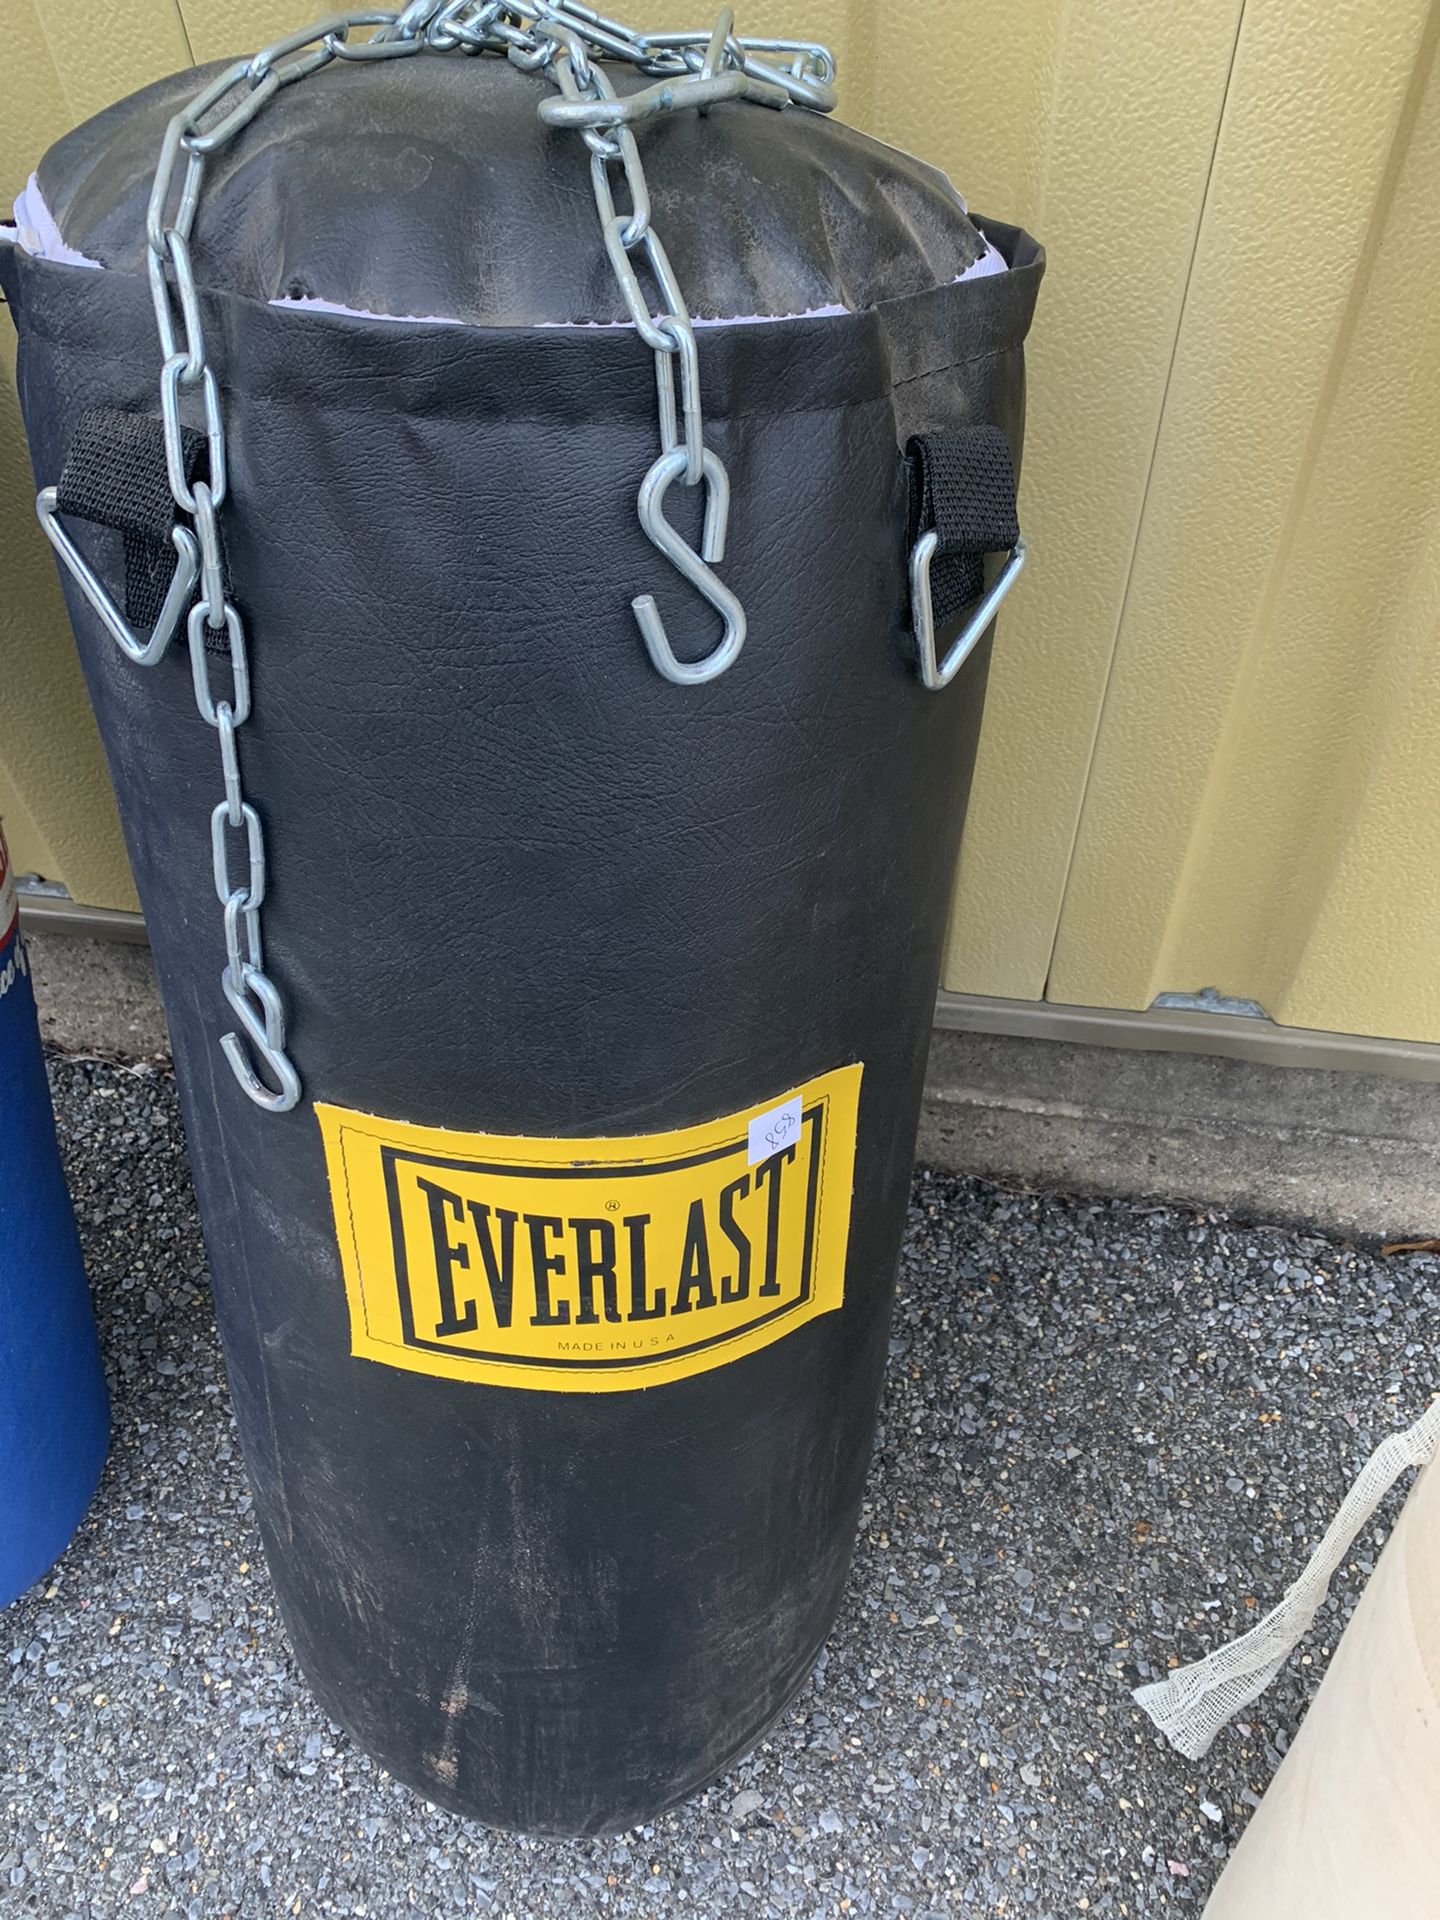 Choice of punching/heavy bags